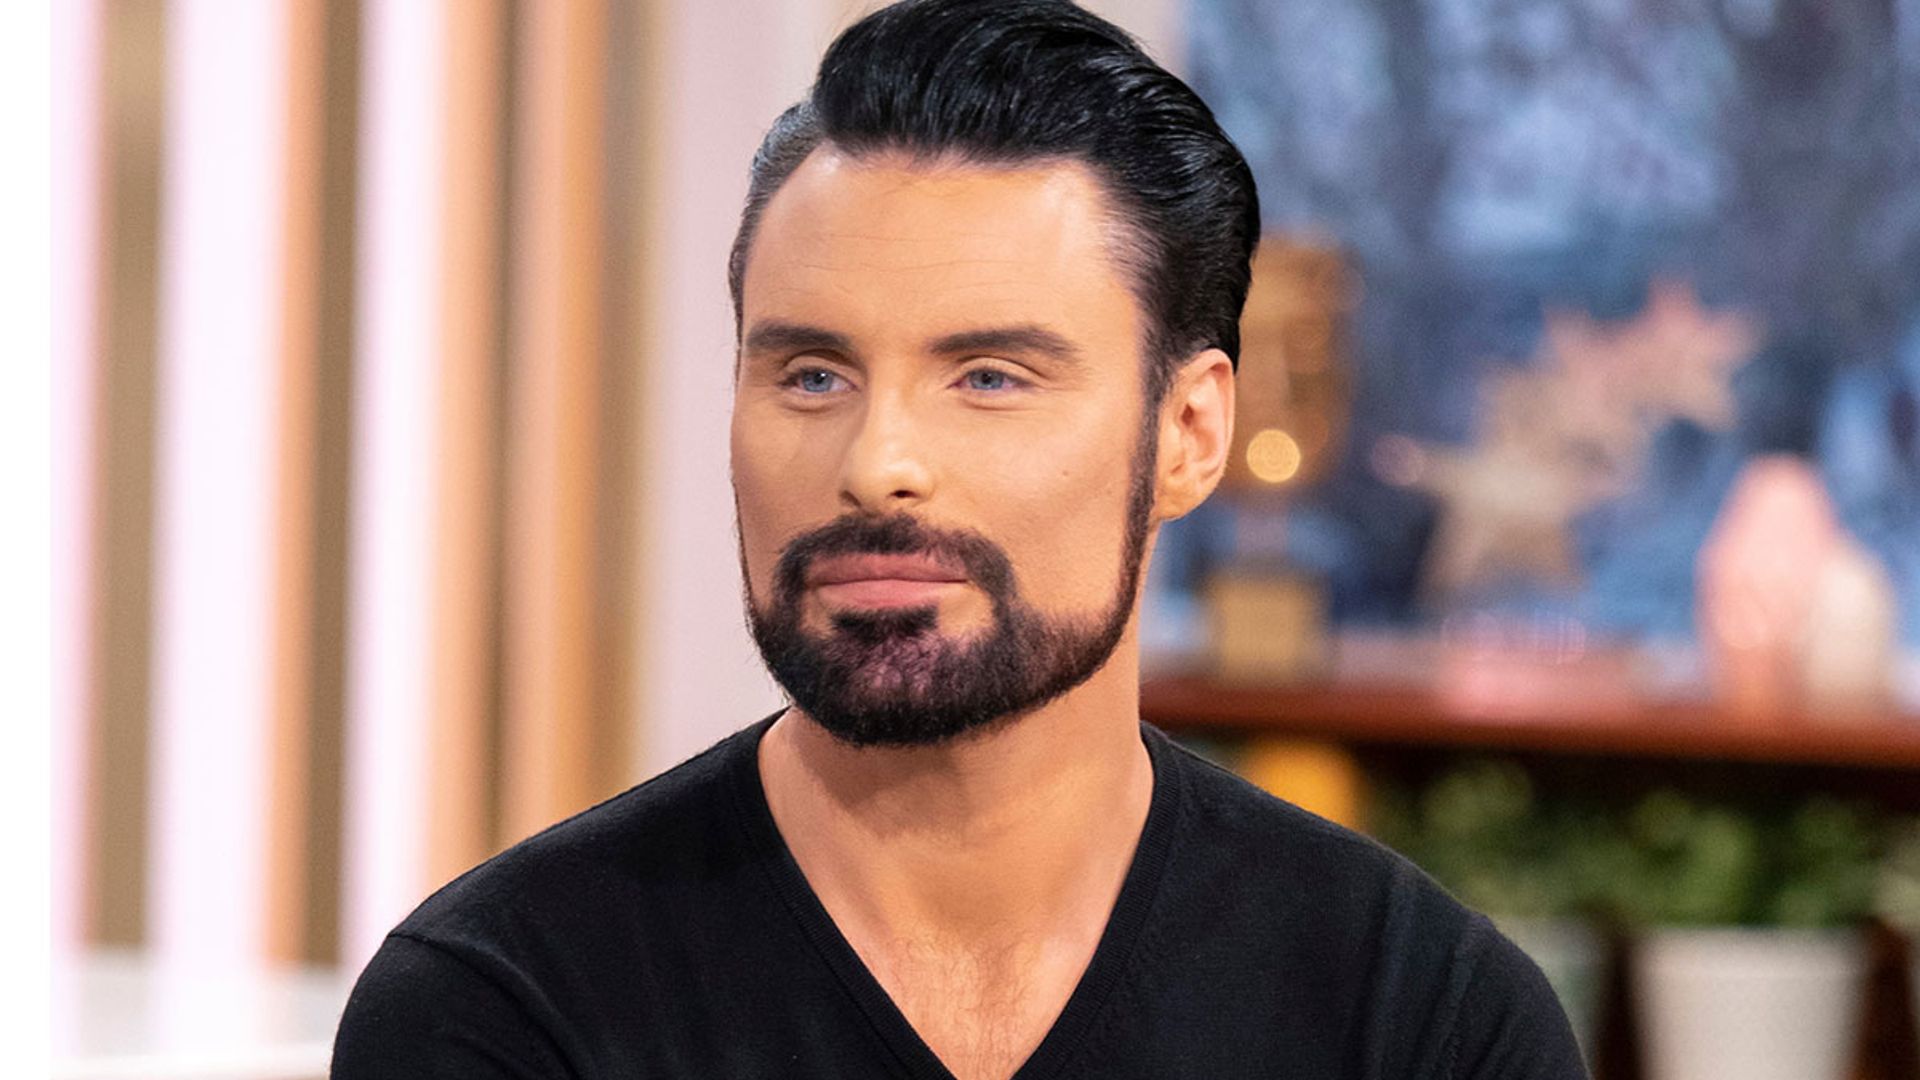 Rylan Clark-Neal replaced by Sara Cox in last-minute Eurovision presenter change